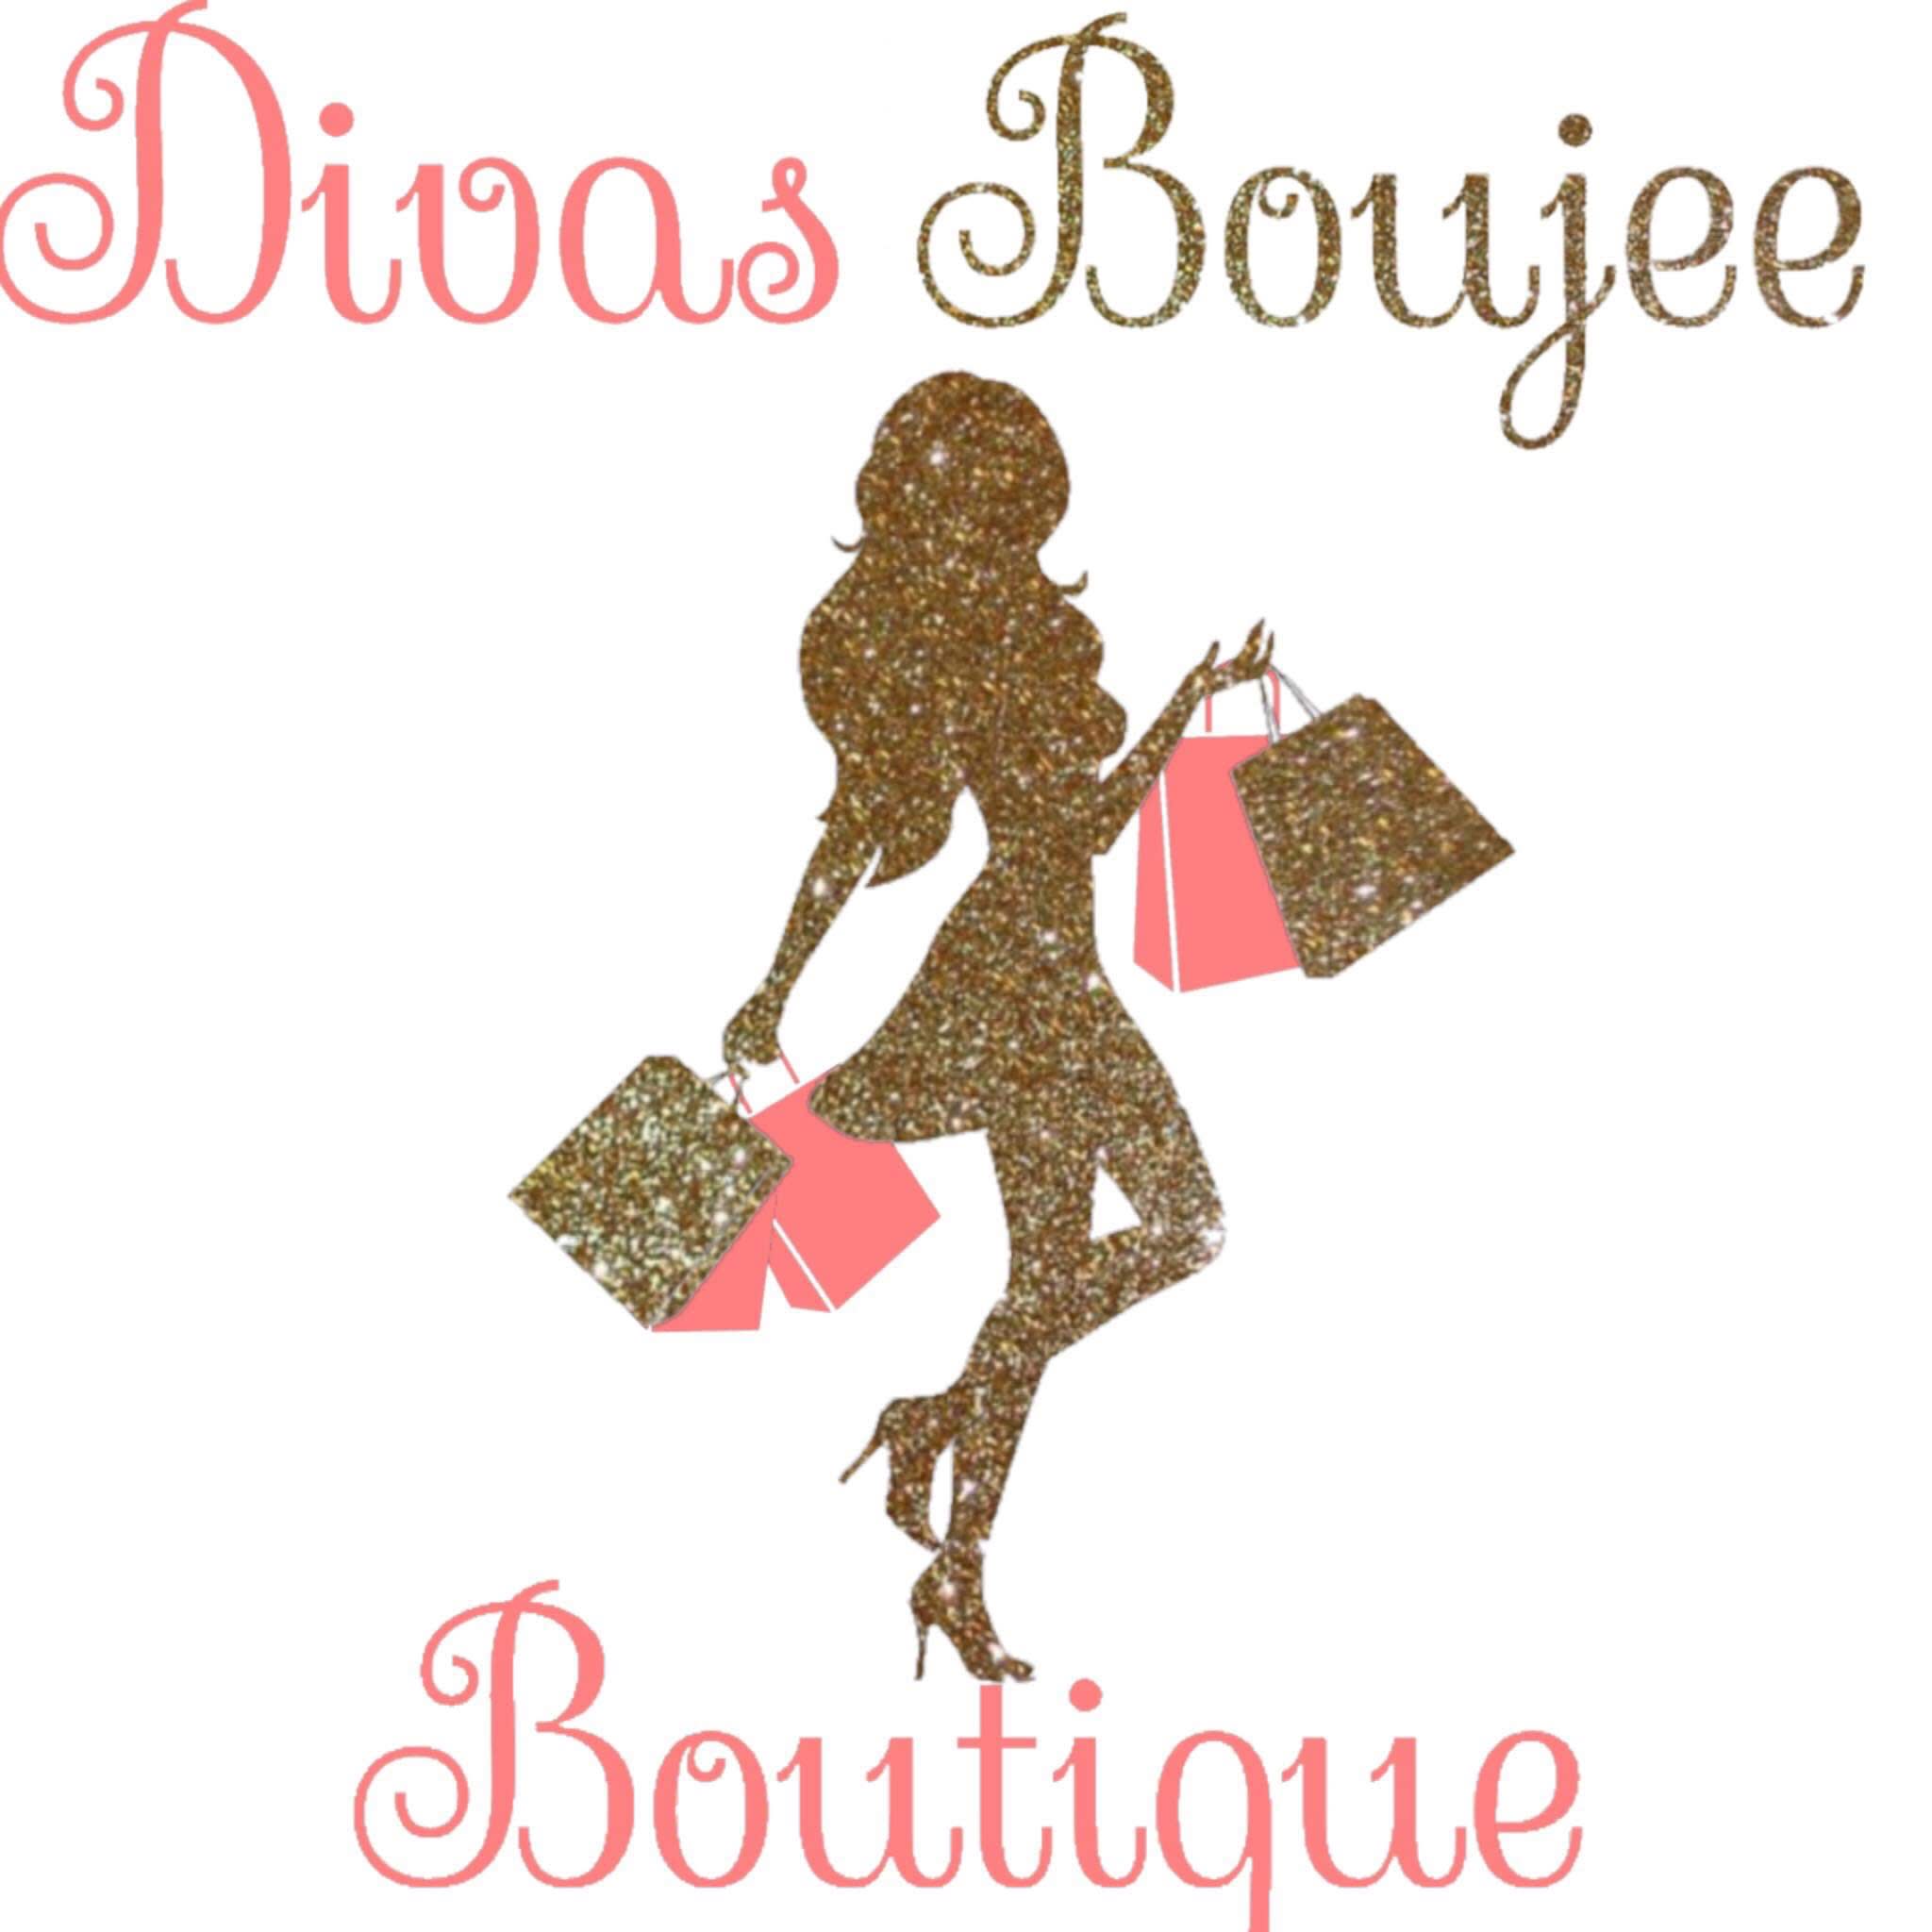 Diva’s Boujee Boutique